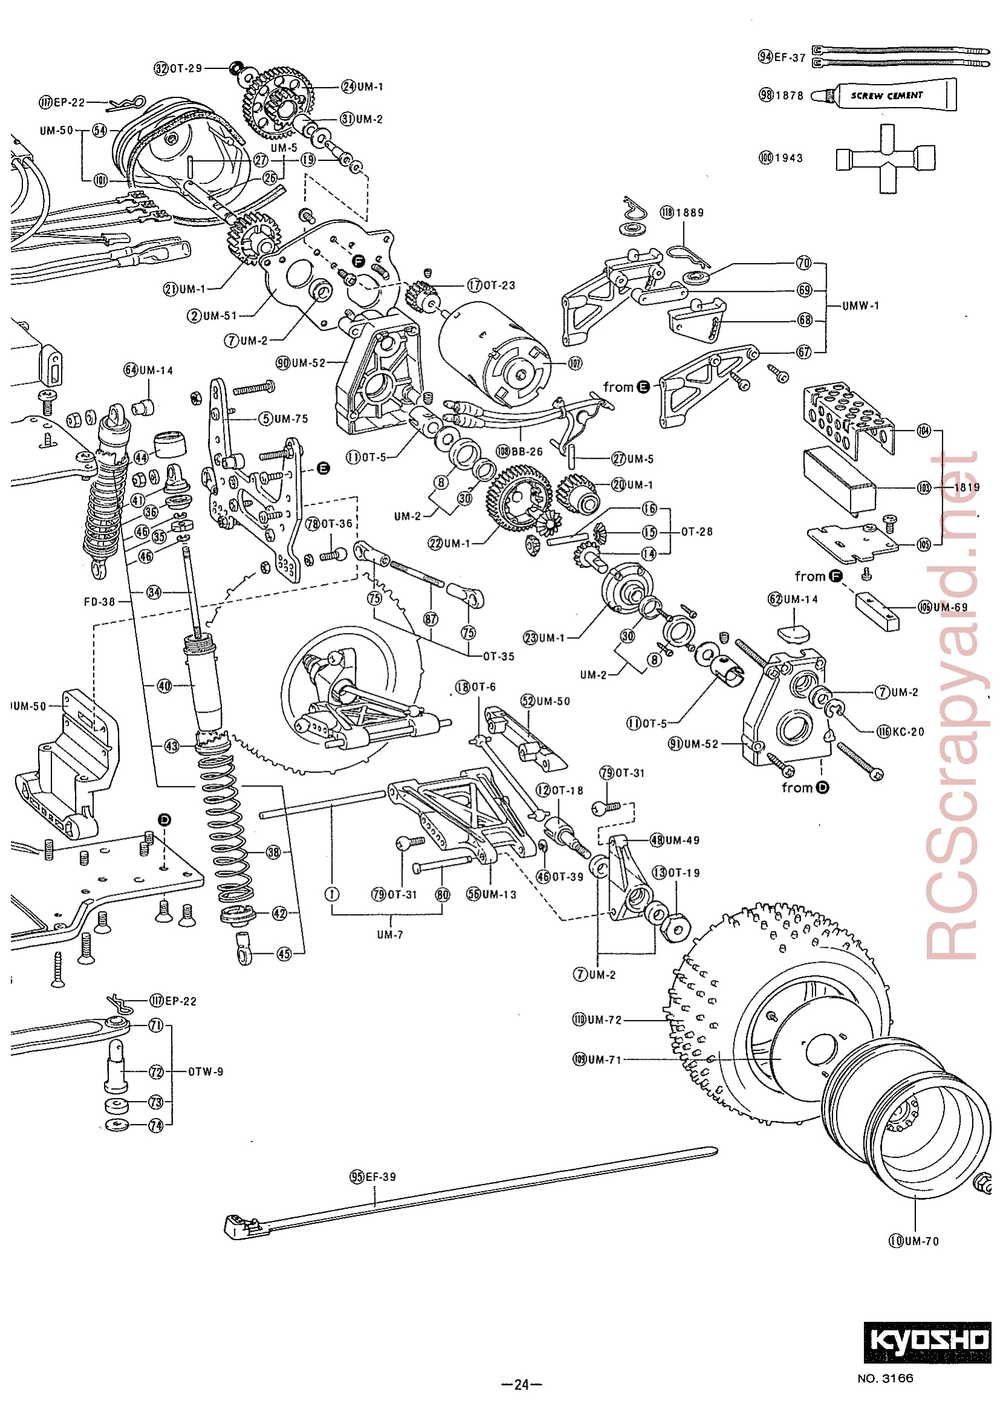 Kyosho - 3166 - Outlaw-Ultima Truck - Manual - Page 15